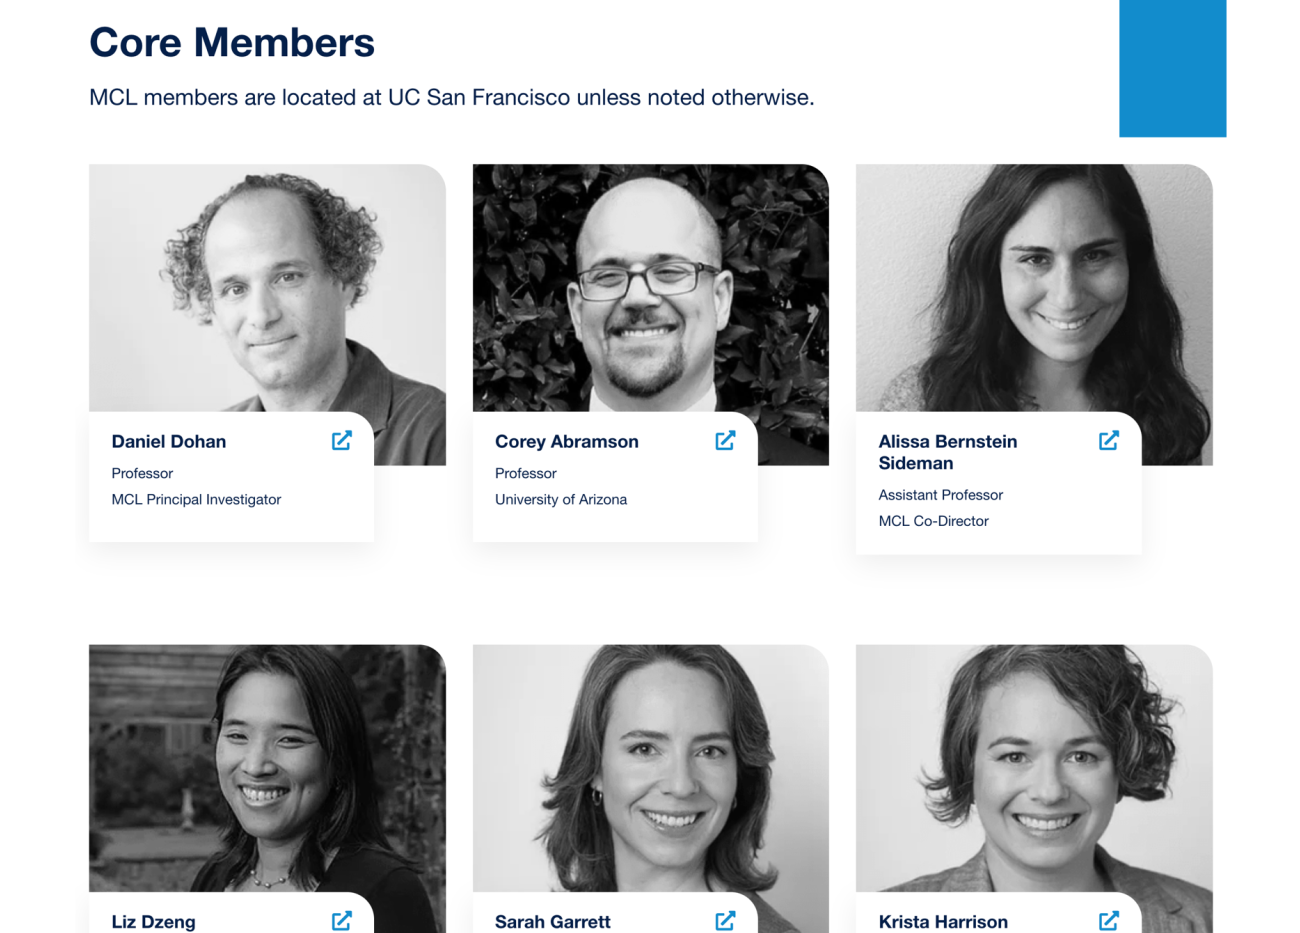 Screenshots of UCSF Culture of Medicine core members page